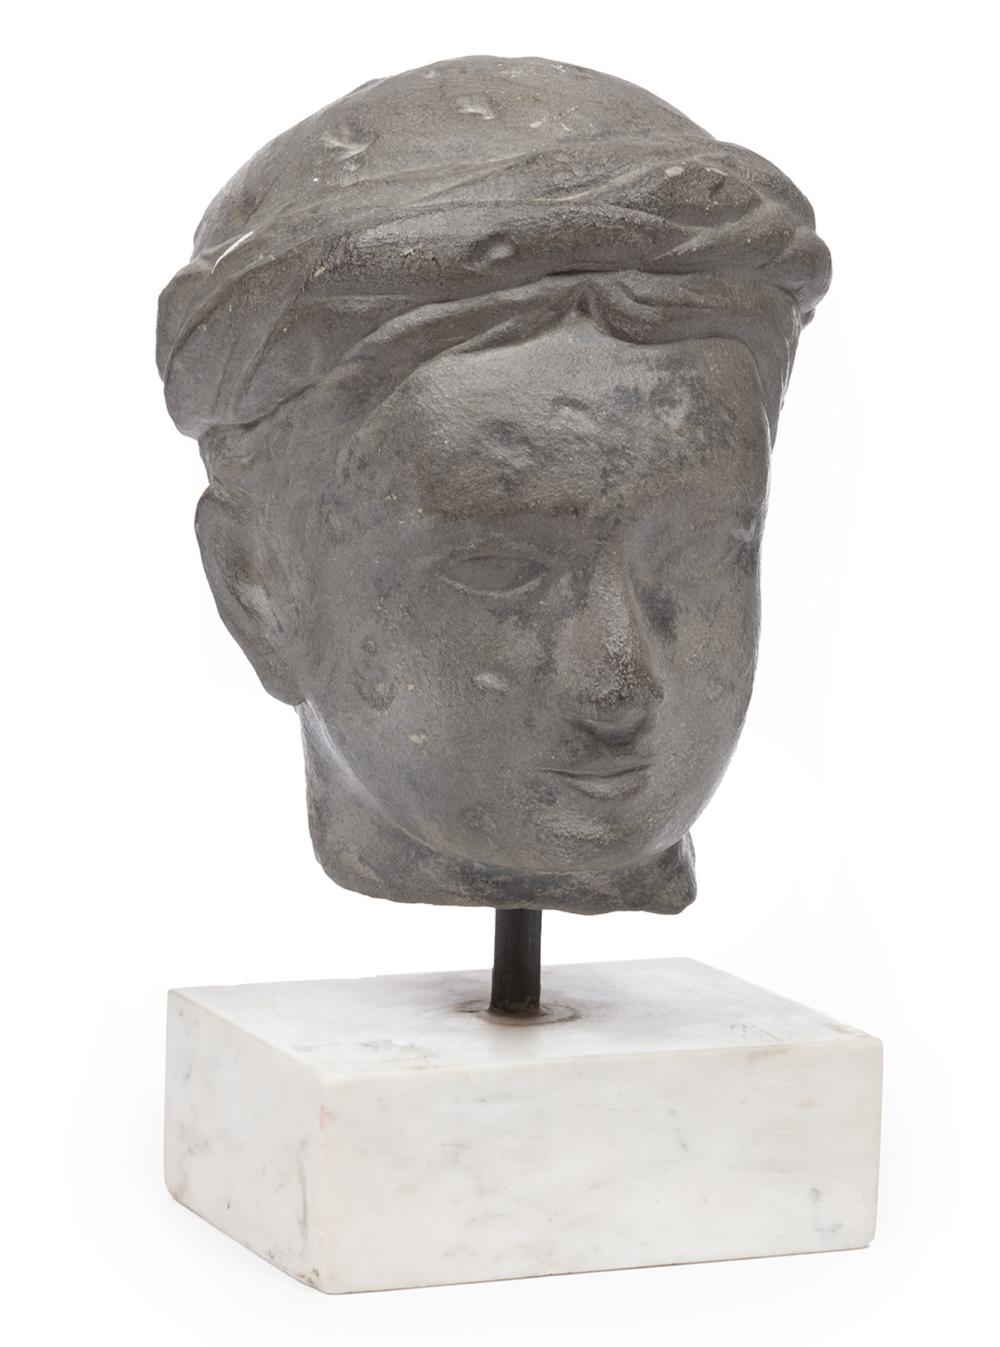 CARVED STONE HEAD OF A TURBANNED